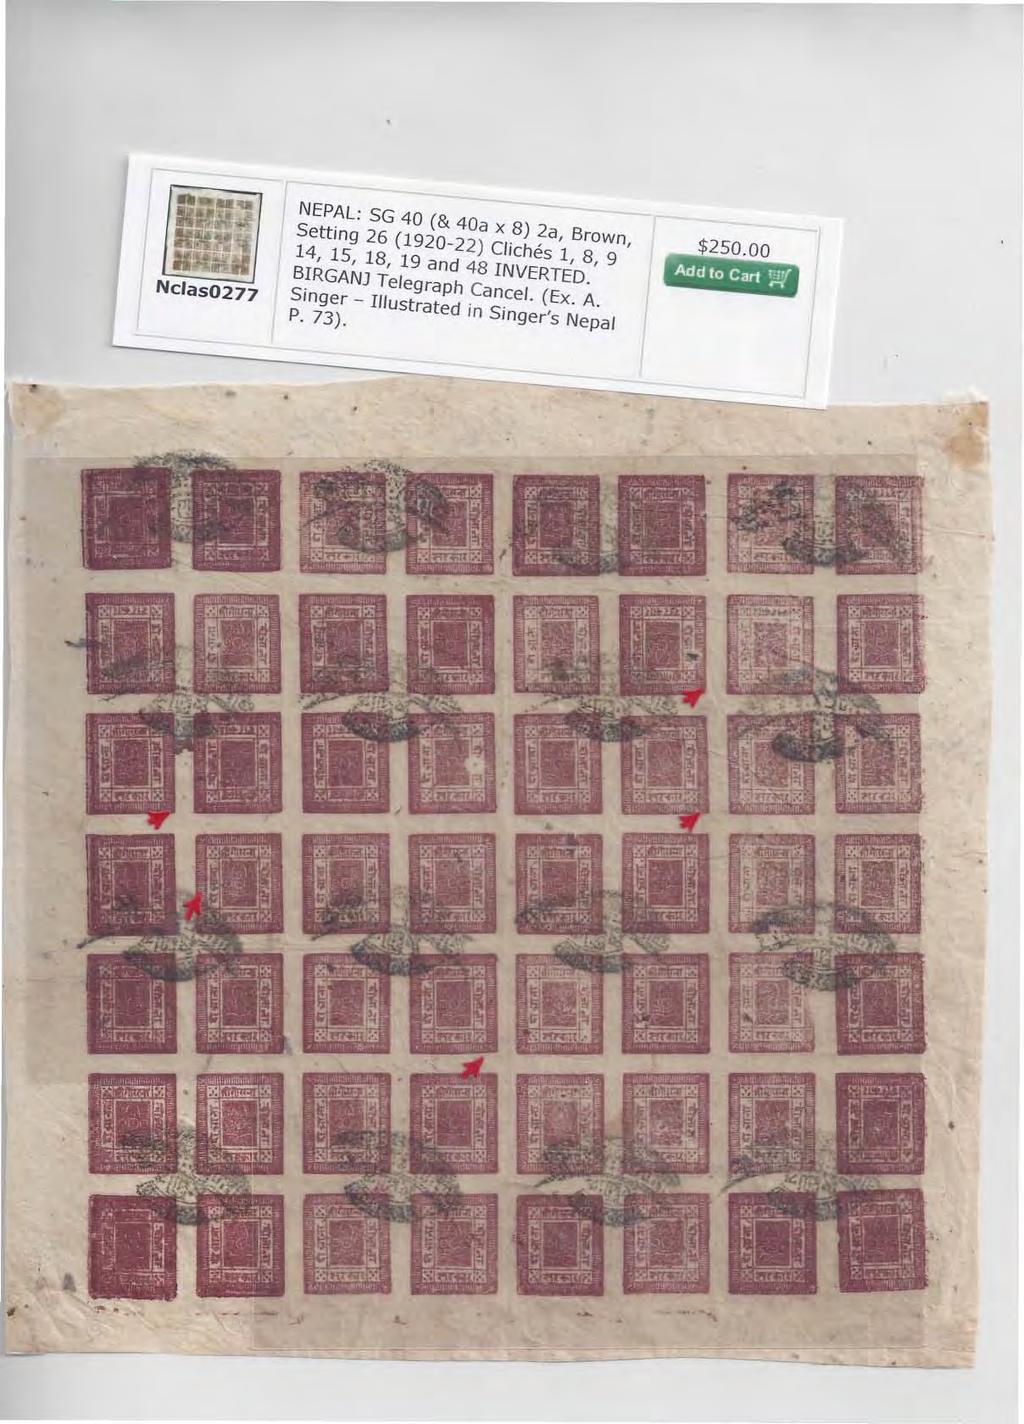 Nclas0277 NEPAL: SG 40 (& 40a X 8) 2a, Brown, Setting 26 (1920-22) Cliches 1, 8, 9 14, 15, 18, 19 and 48